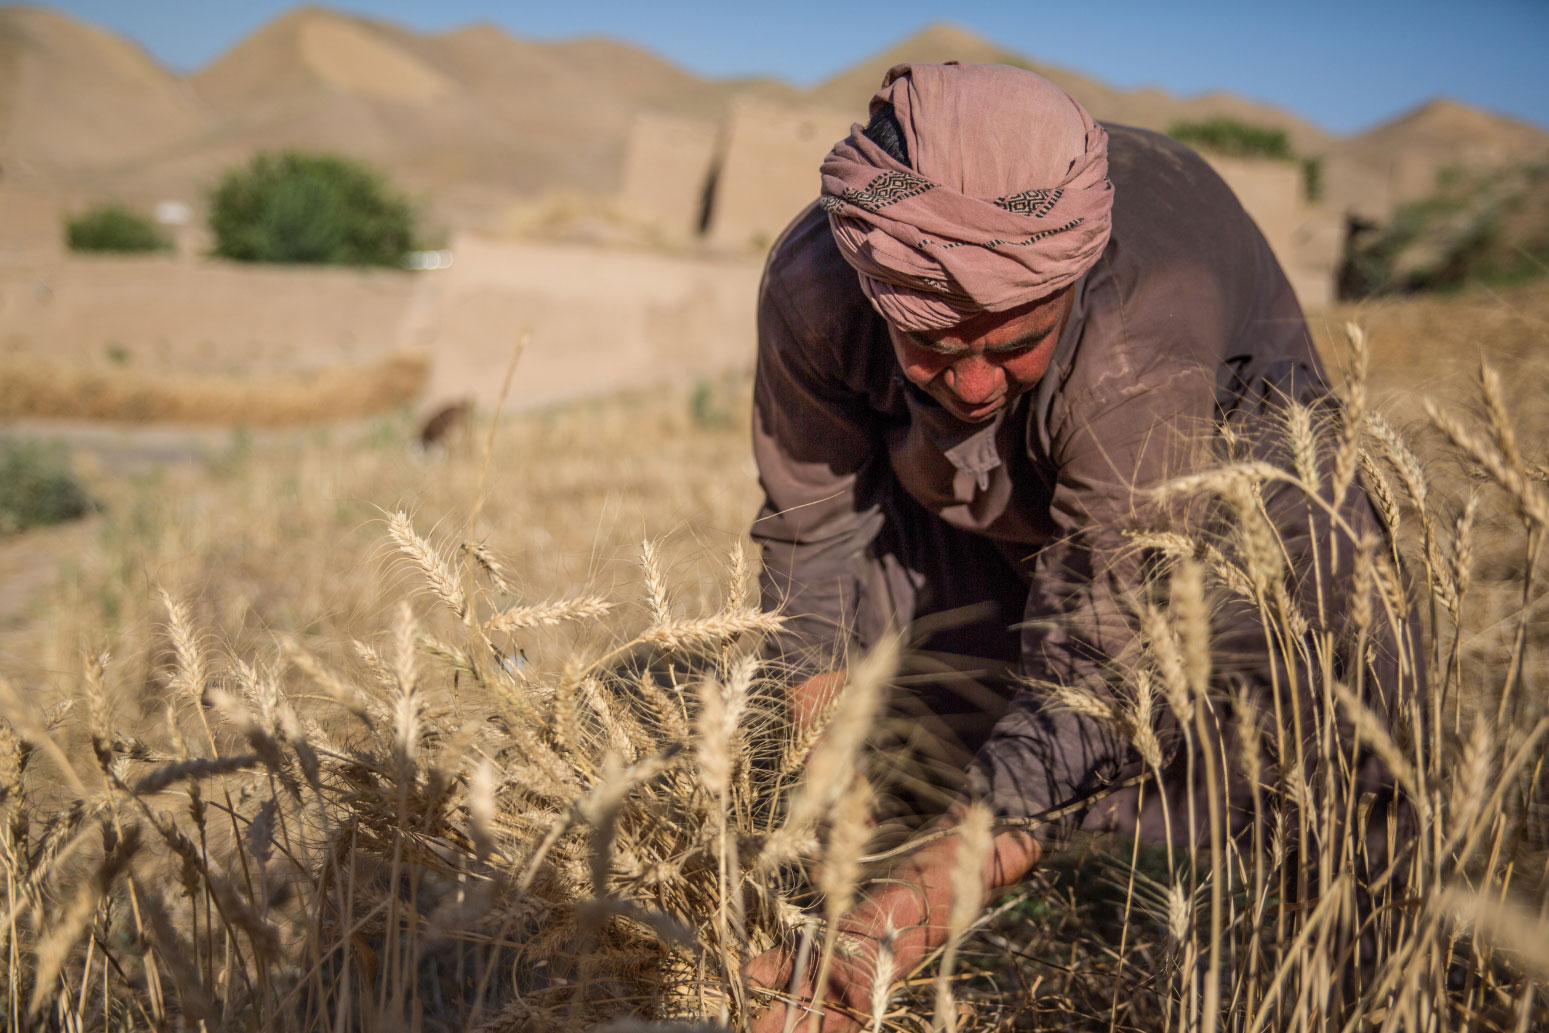 Abdul Baqi, 30, working on his farm in Badghis, Afghanistan. Abdul has been assisted by IRC cash relief.